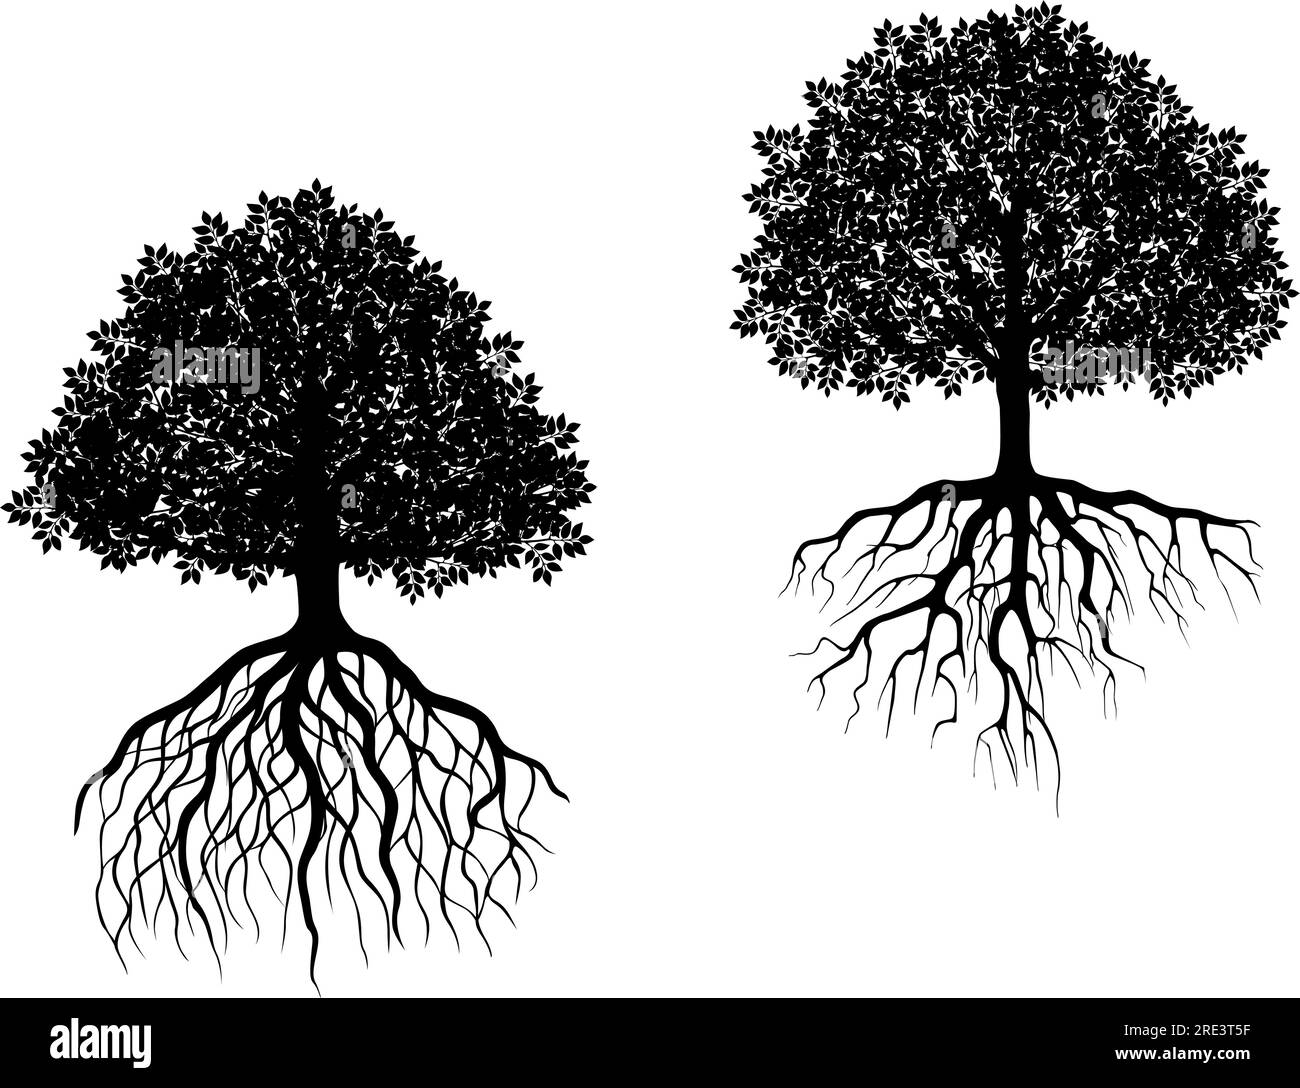 Two black and white vector trees showing different root systems with intricate fibrous roots and differently shaped leafy canopies Stock Vector